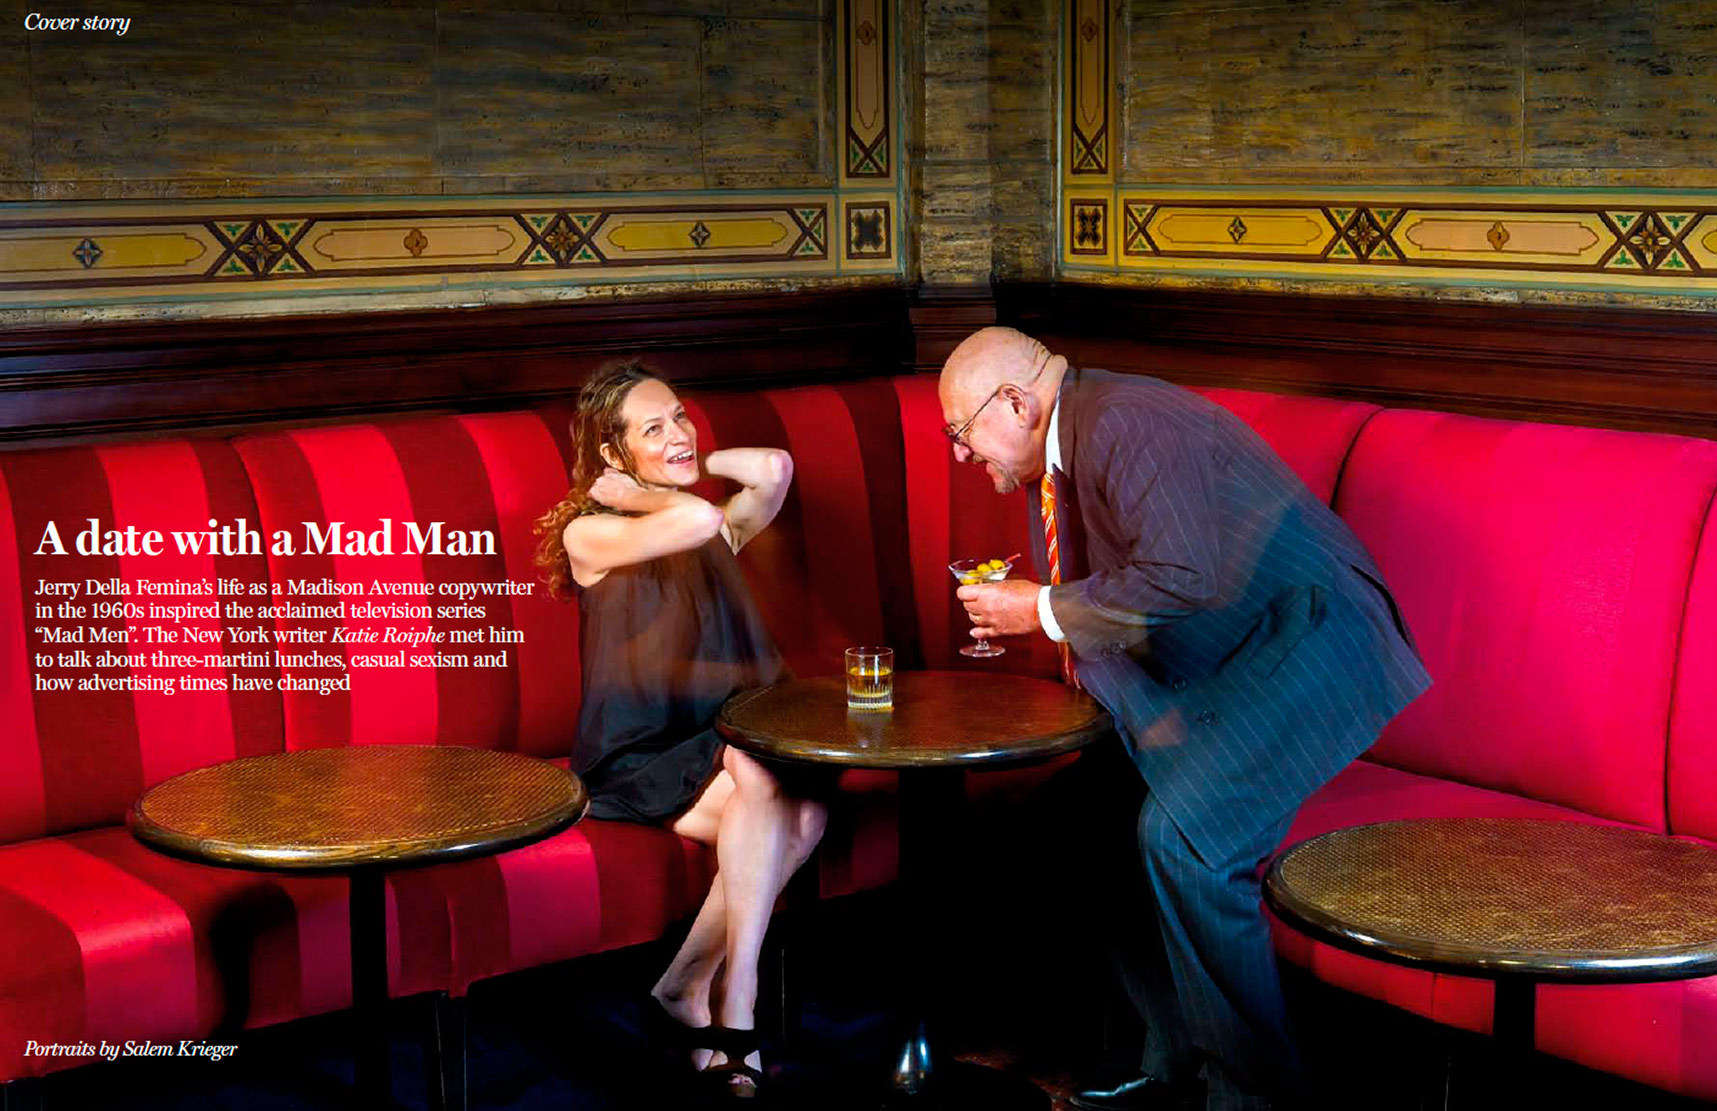 Cover story for FT Weekend, London - The man whom the TV series "Mad Men" was based on; Jerry Della Femina with New York Mag. writer Katie Roiphe photographed at the Campbell Apts., Grand Central Station, NYC : Portraits : New York City portrait photographer